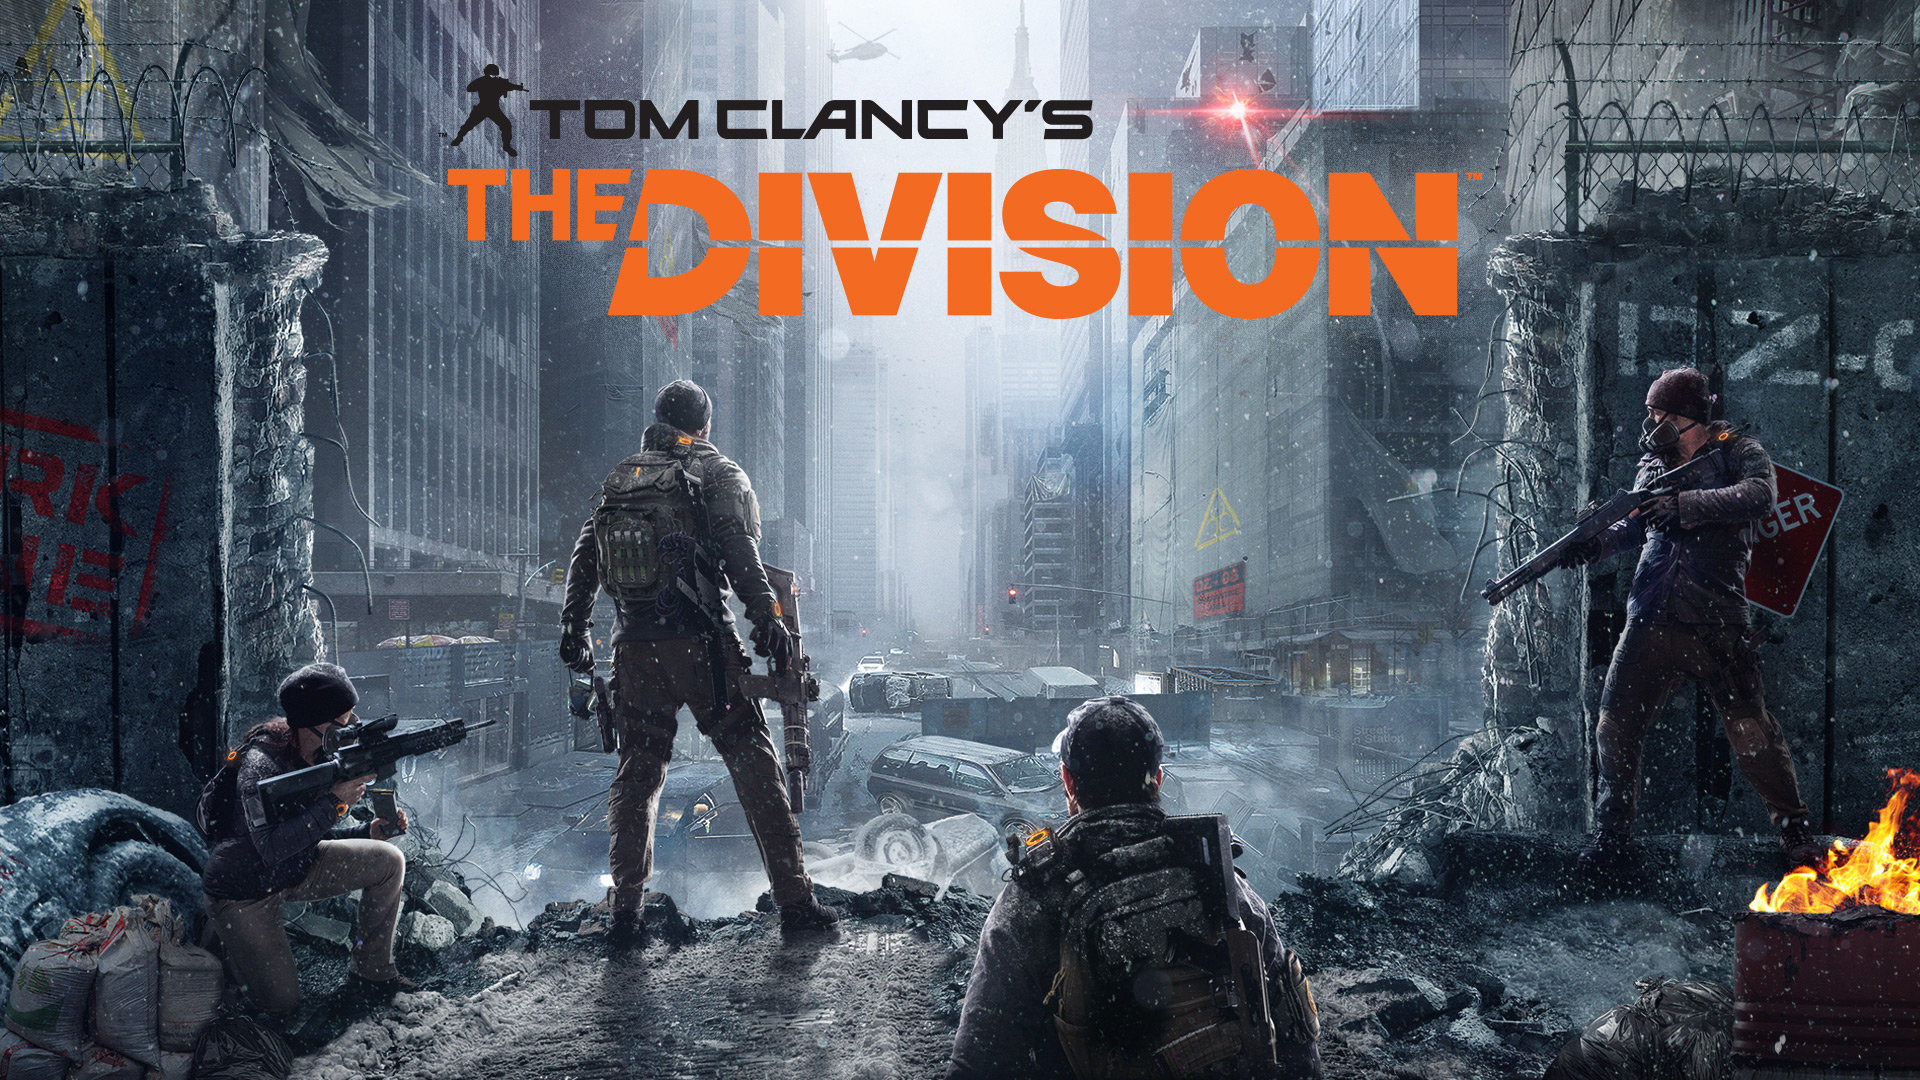 Download Full Hd Tom Clancy S The Division Desktop - Punisher Tom Clancy's The Division - HD Wallpaper 